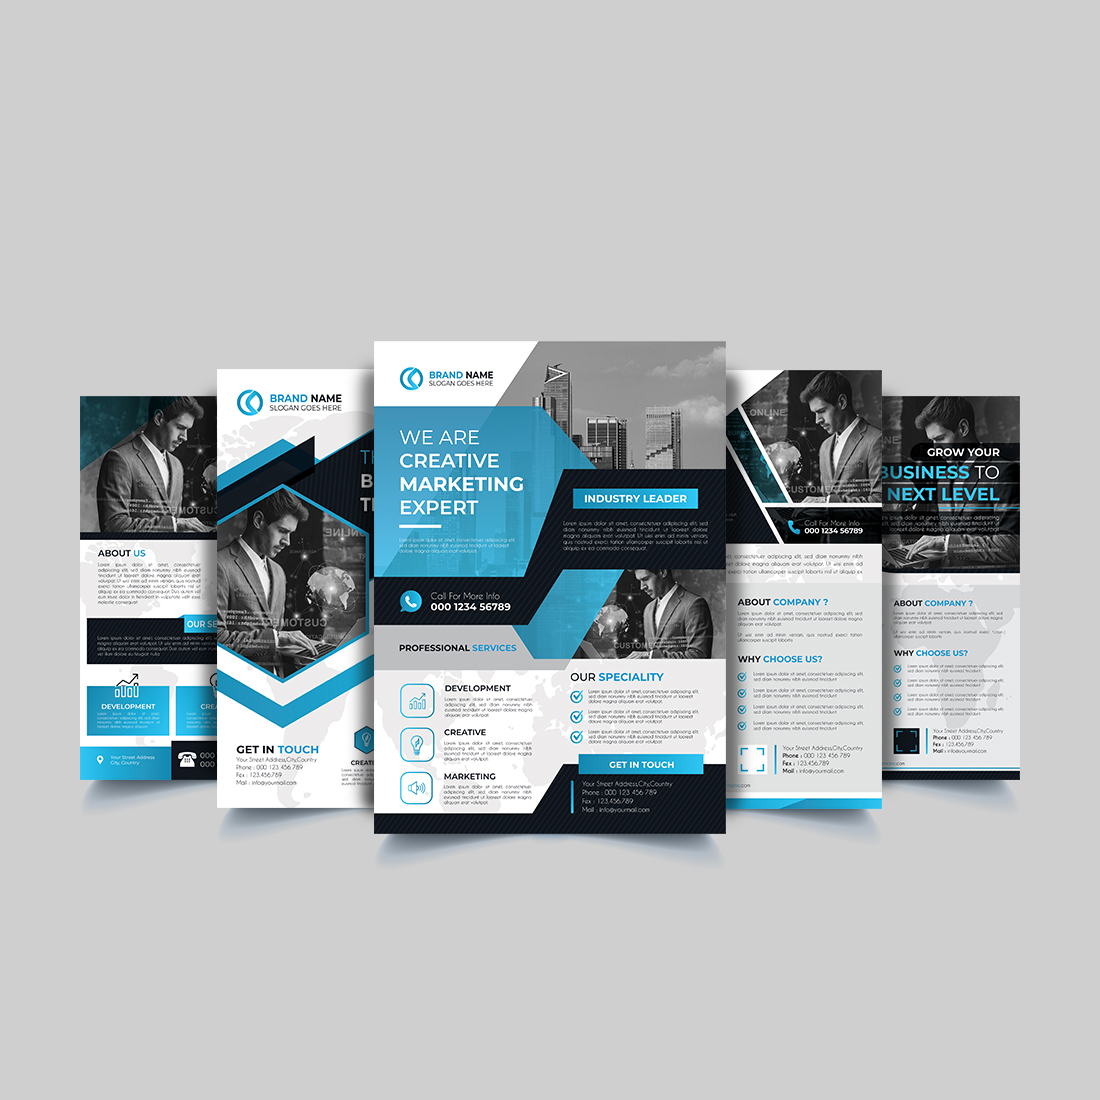 professional flyer background templates